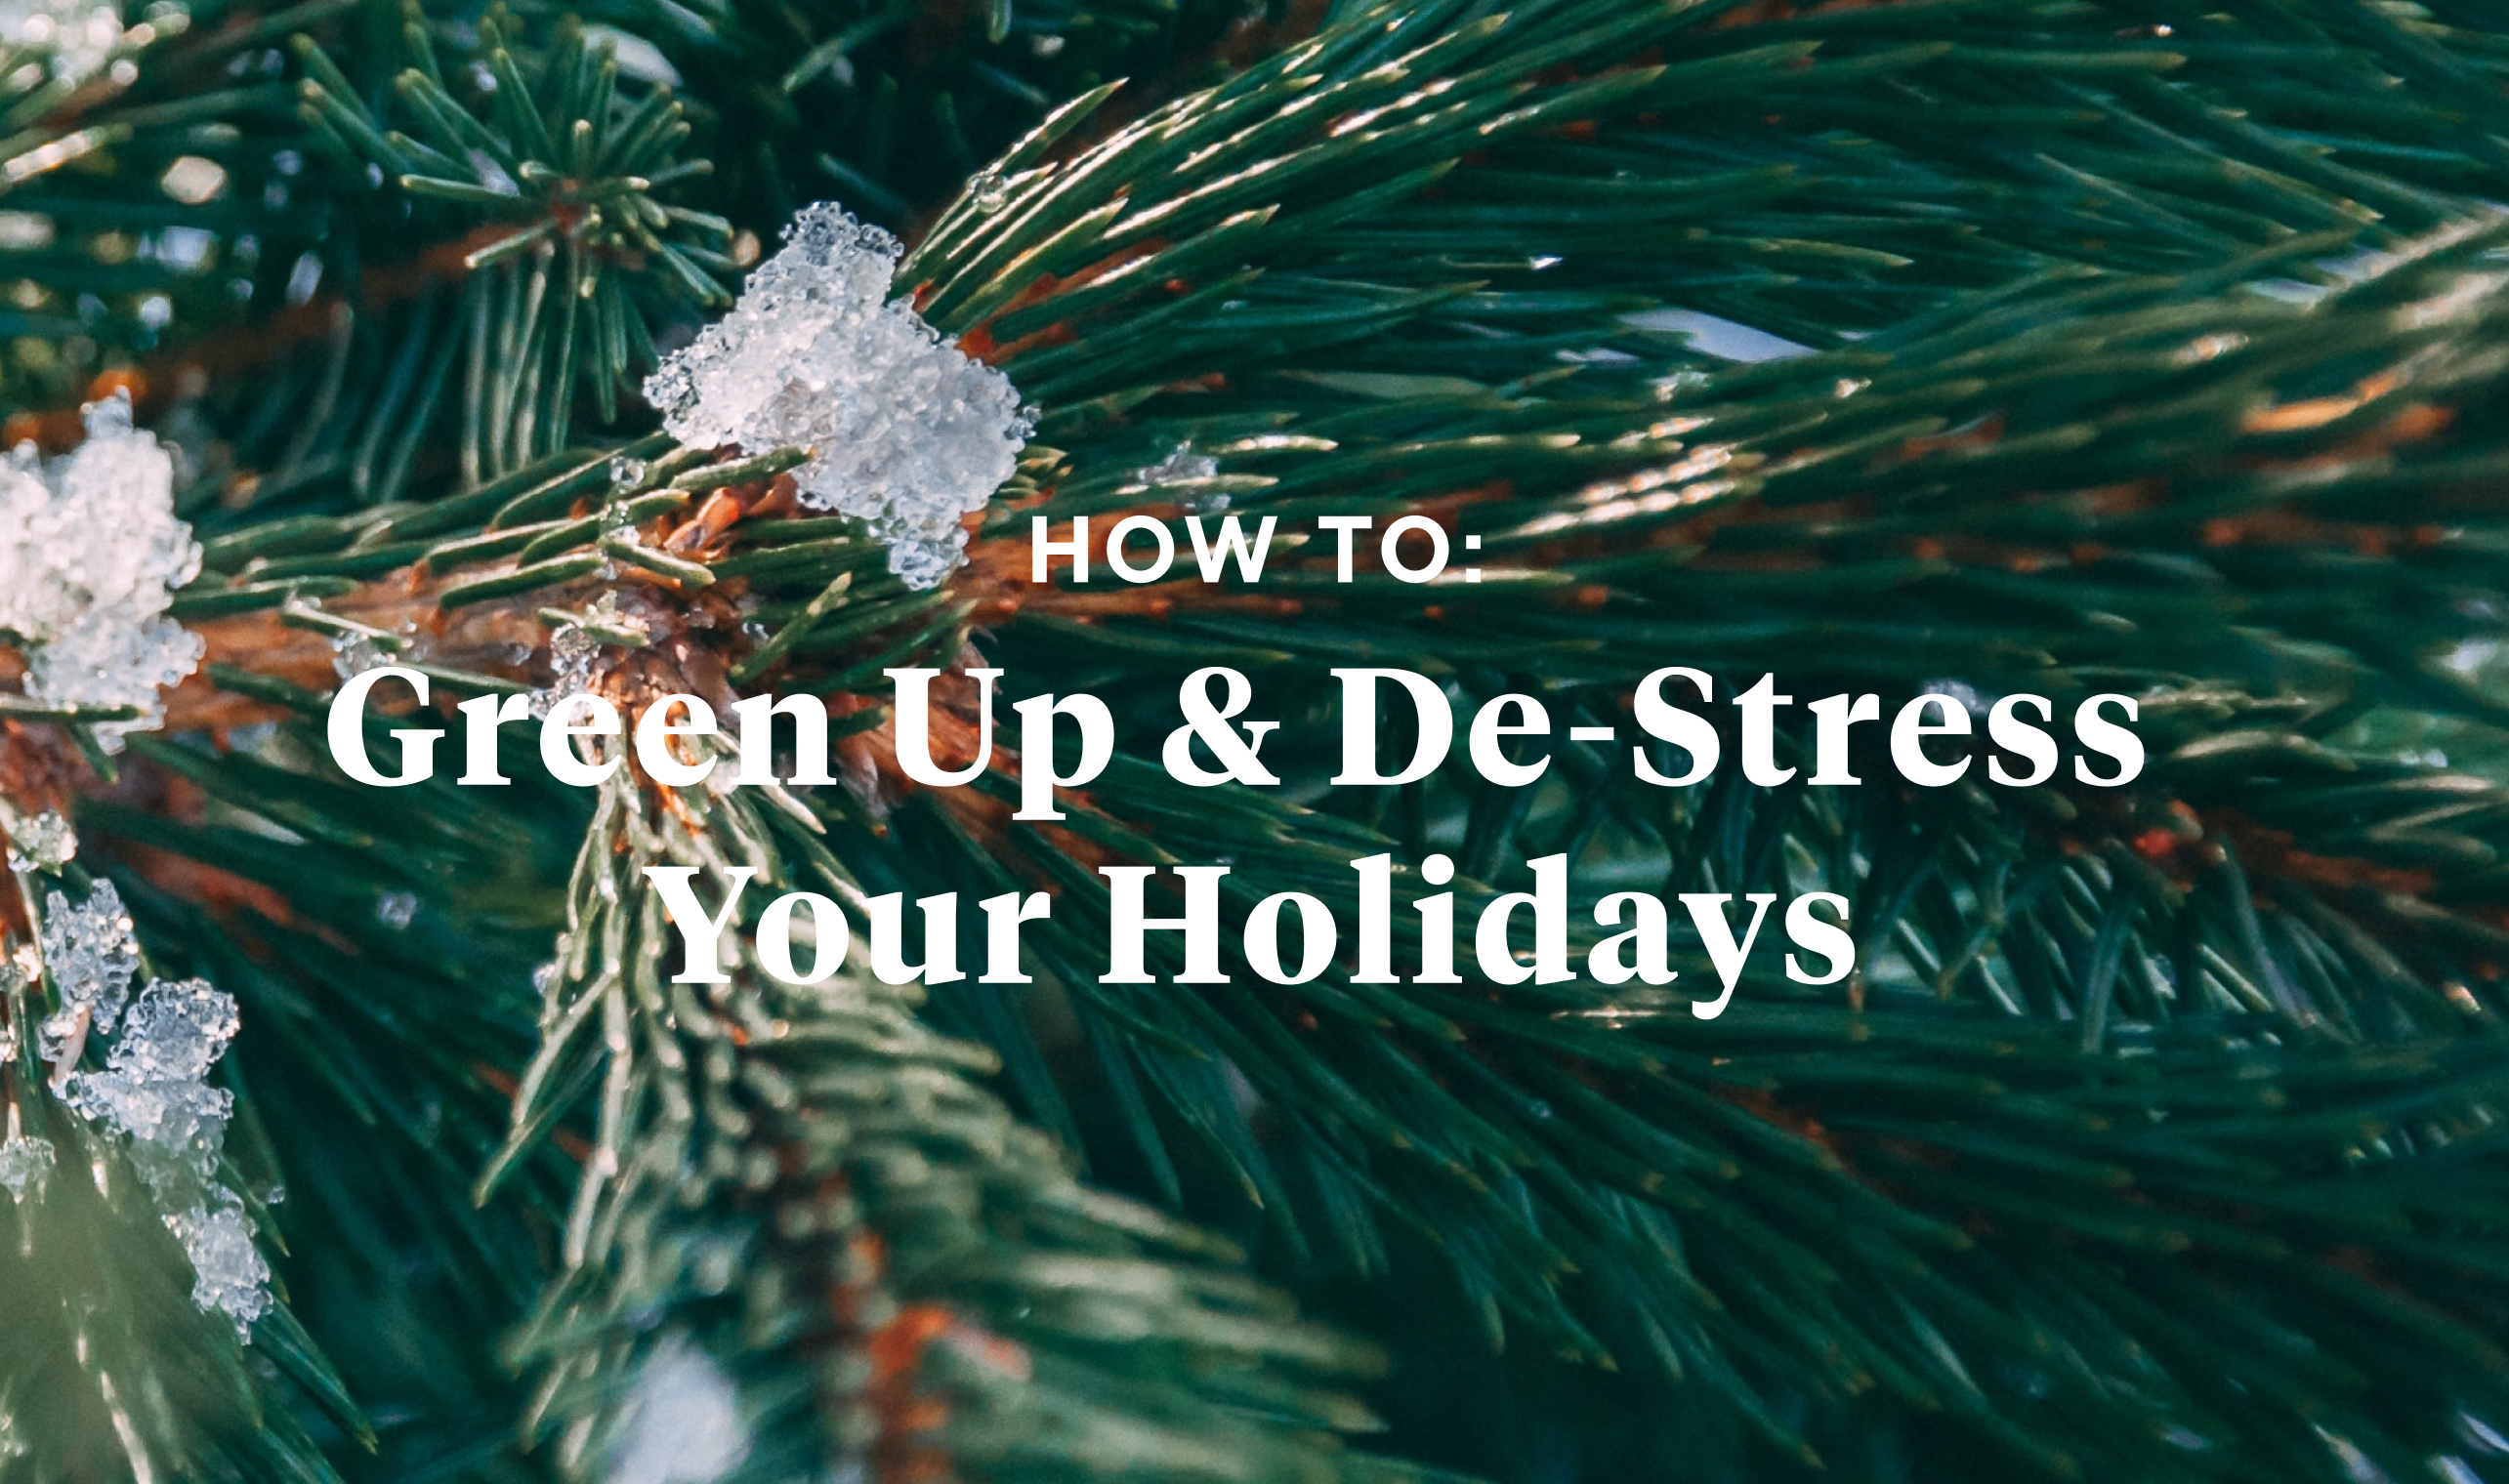 How To: Green Up and De-Stress your Holidays